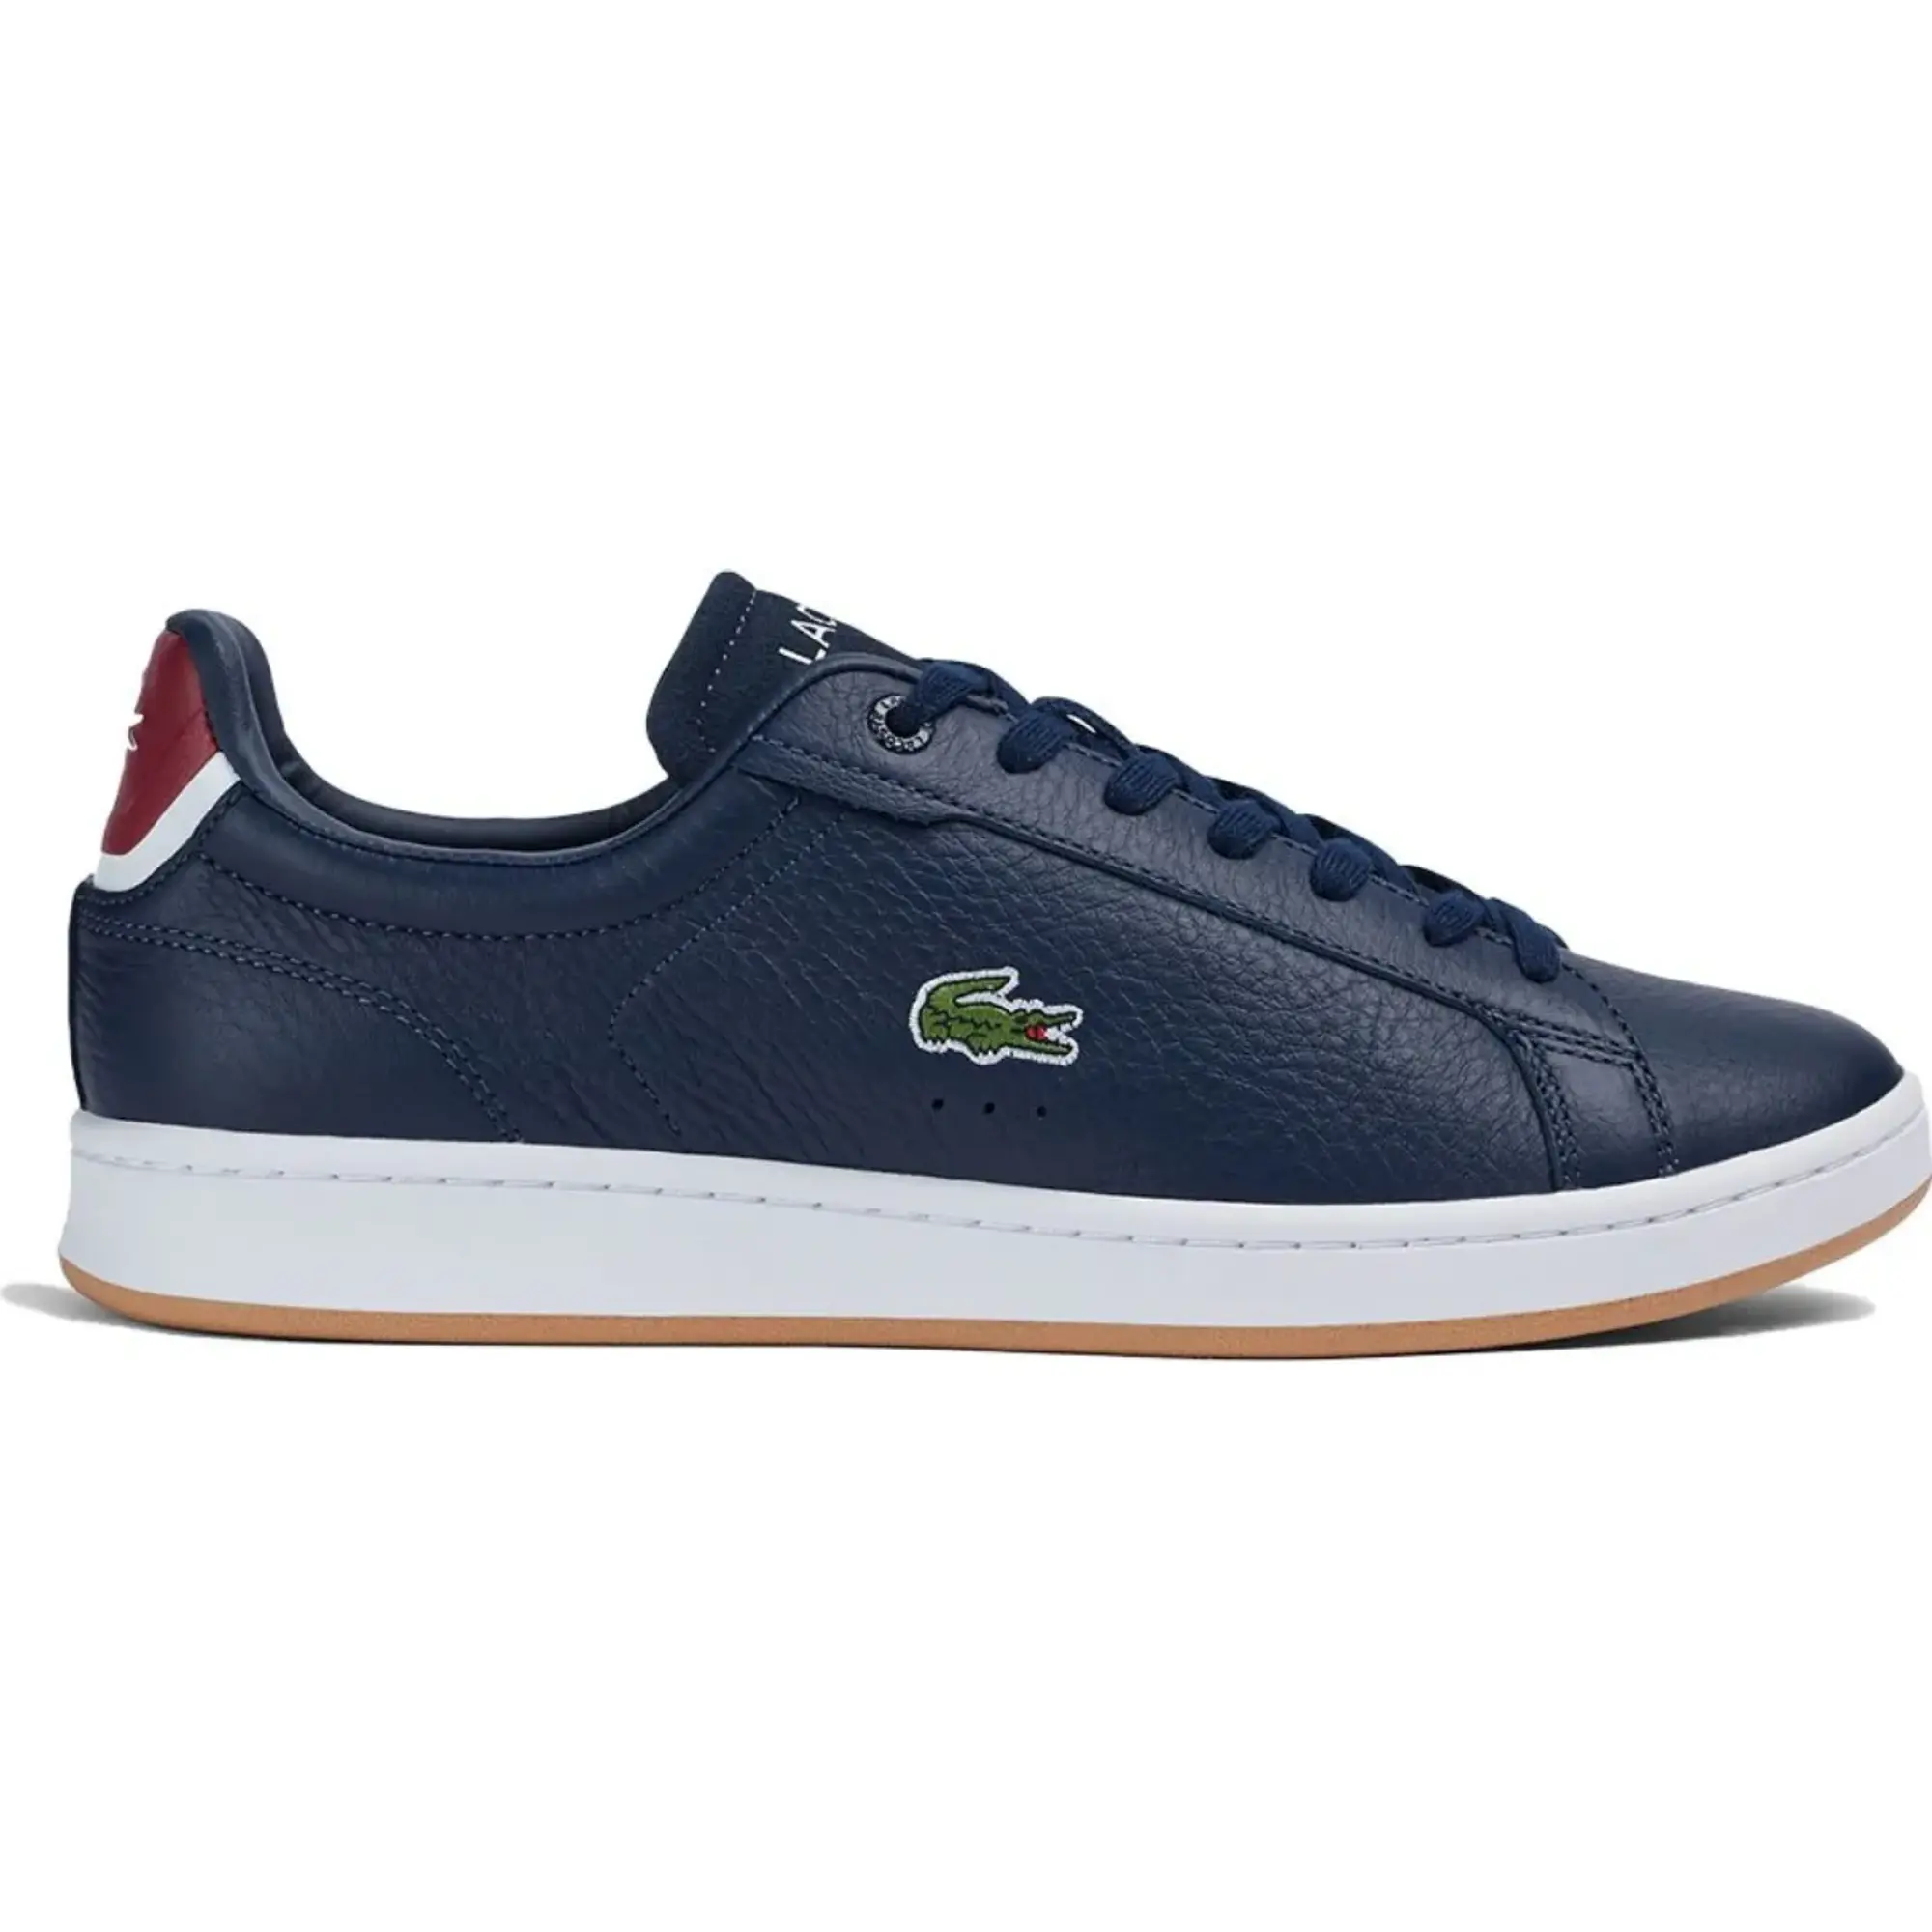 Lacoste Carnaby Pro 222 6 Sma Trainer - Navy/Gum, Navy/Gum